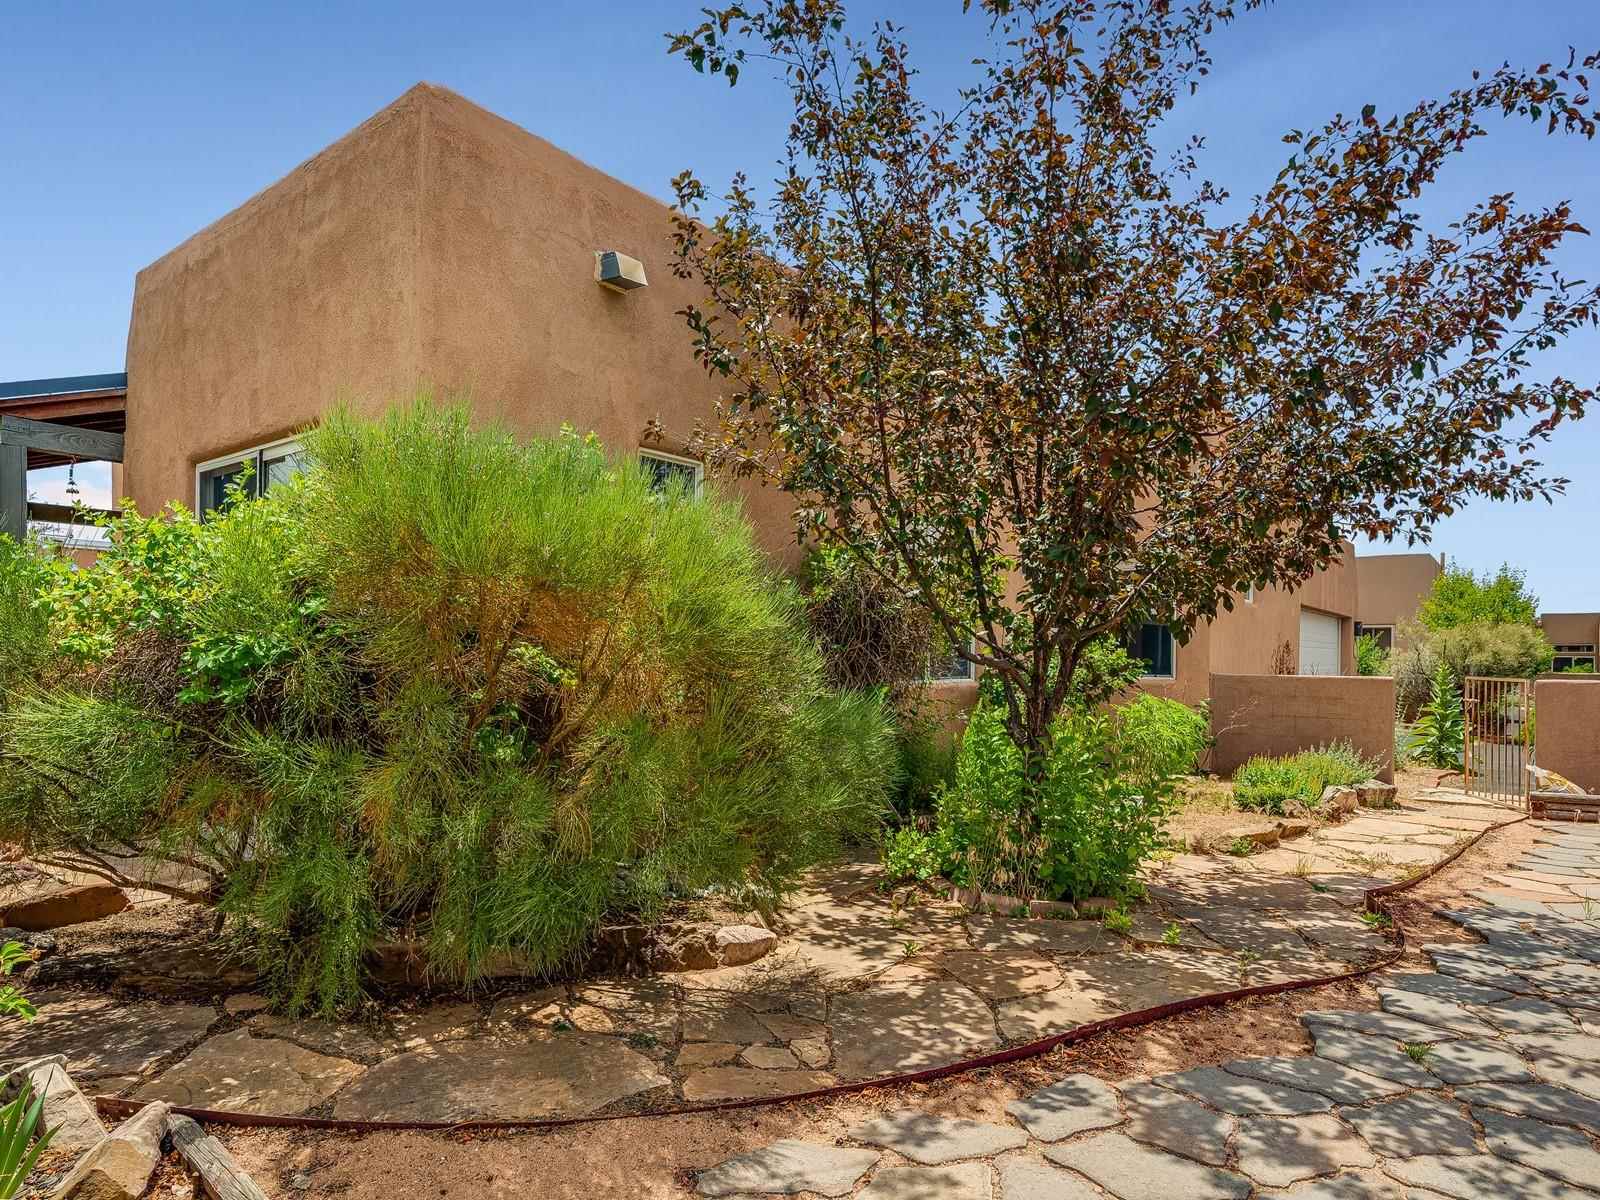 4 SHANNON, Santa Fe, New Mexico 87508, 3 Bedrooms Bedrooms, ,2 BathroomsBathrooms,Residential,For Sale,4 SHANNON,202102964